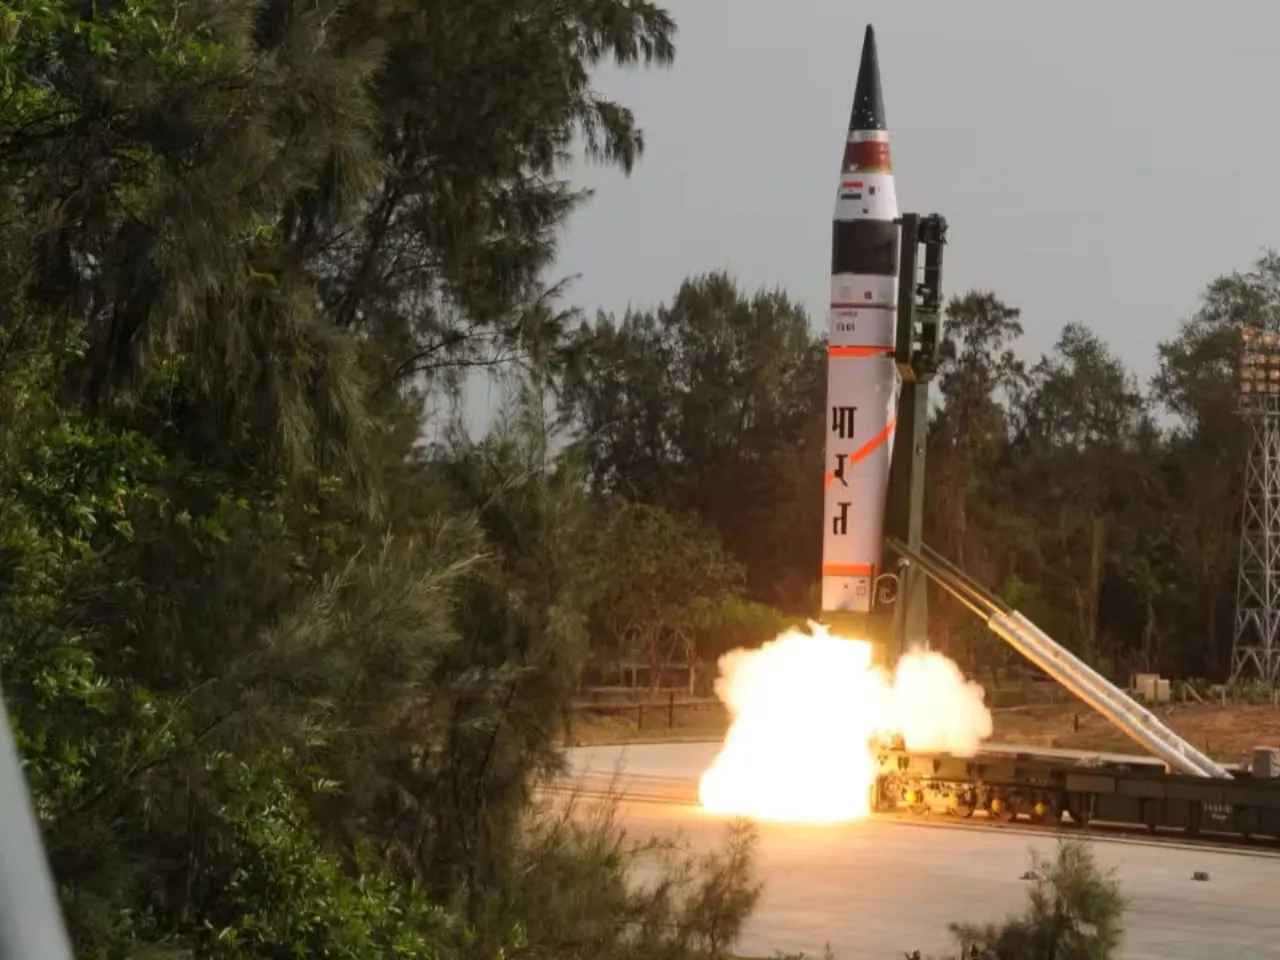 Why the MIRV Agni 5 is a defence milestone: Gen Siwach explains